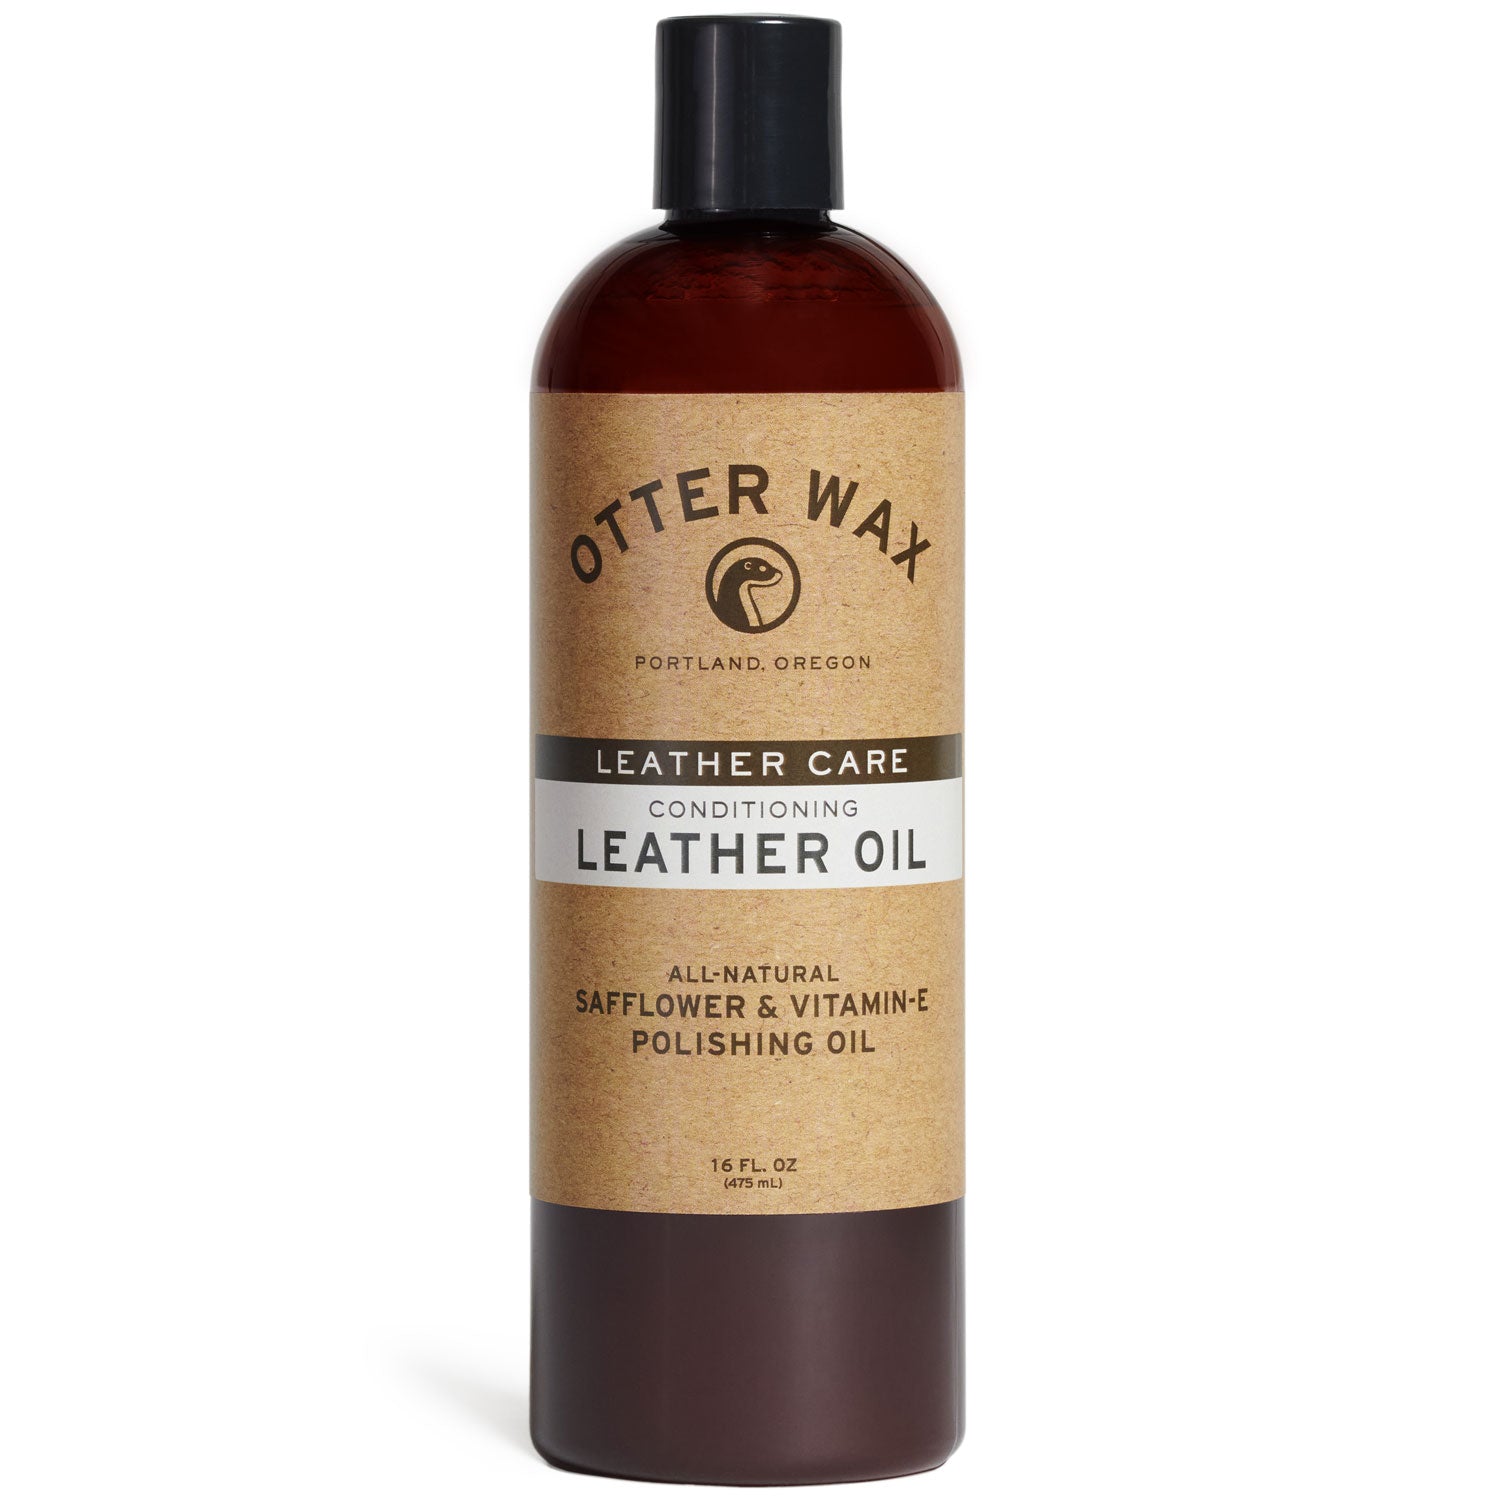 How To Apply Otter Wax All Natural Leather Conditioning And Polishing Oil For Furniture Jackets Boots Car Interiors And More